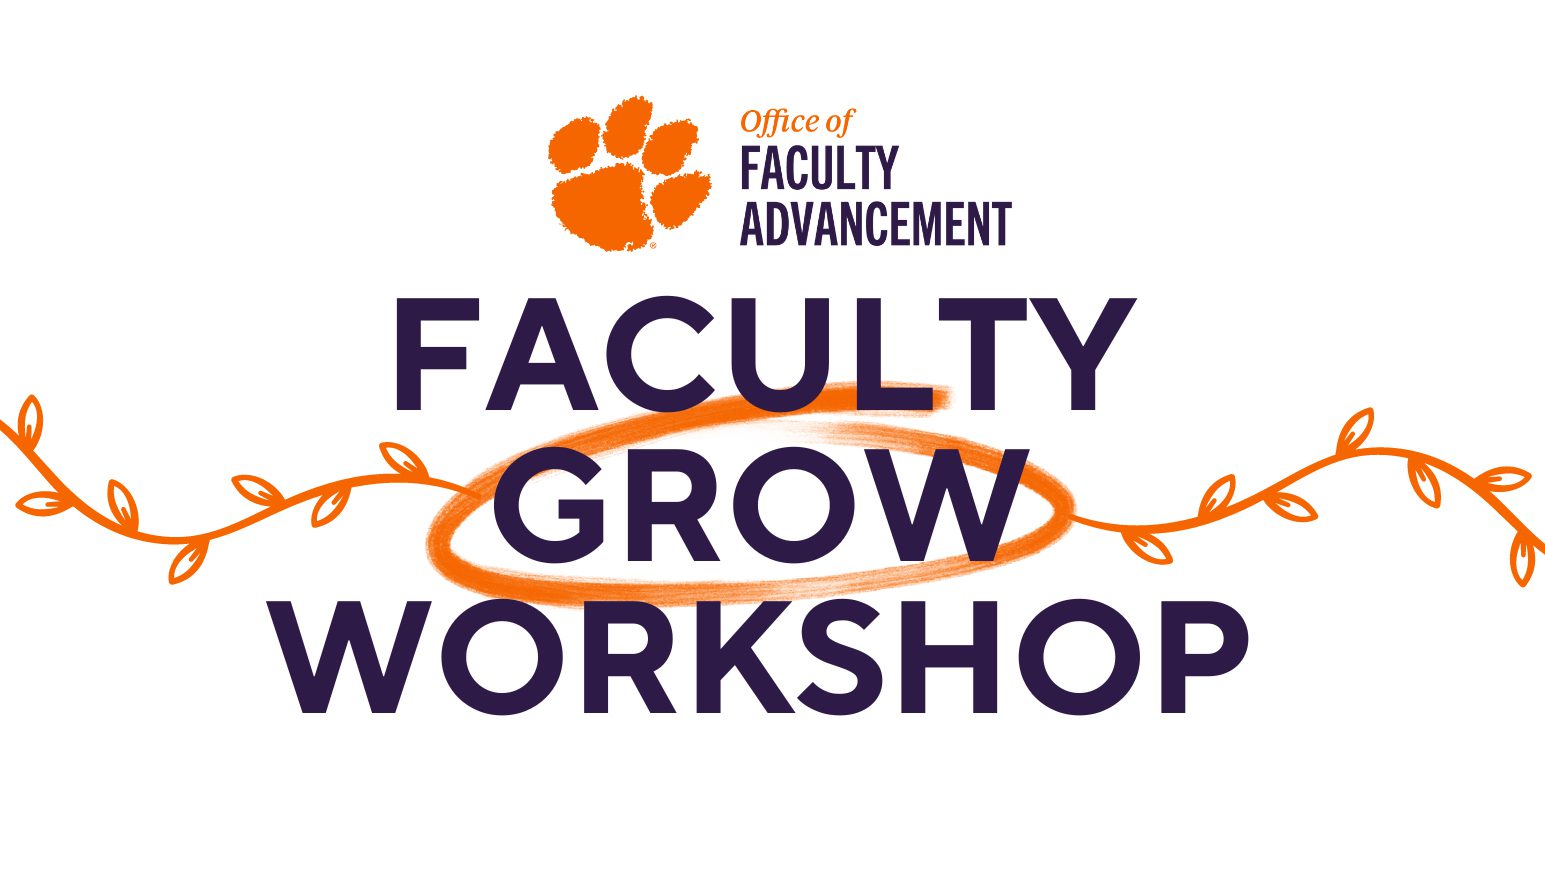 Text that reads "Faculty Grow Workshop" with orange vines around "Grow" and the Office of Faculty Advancement wordmark above